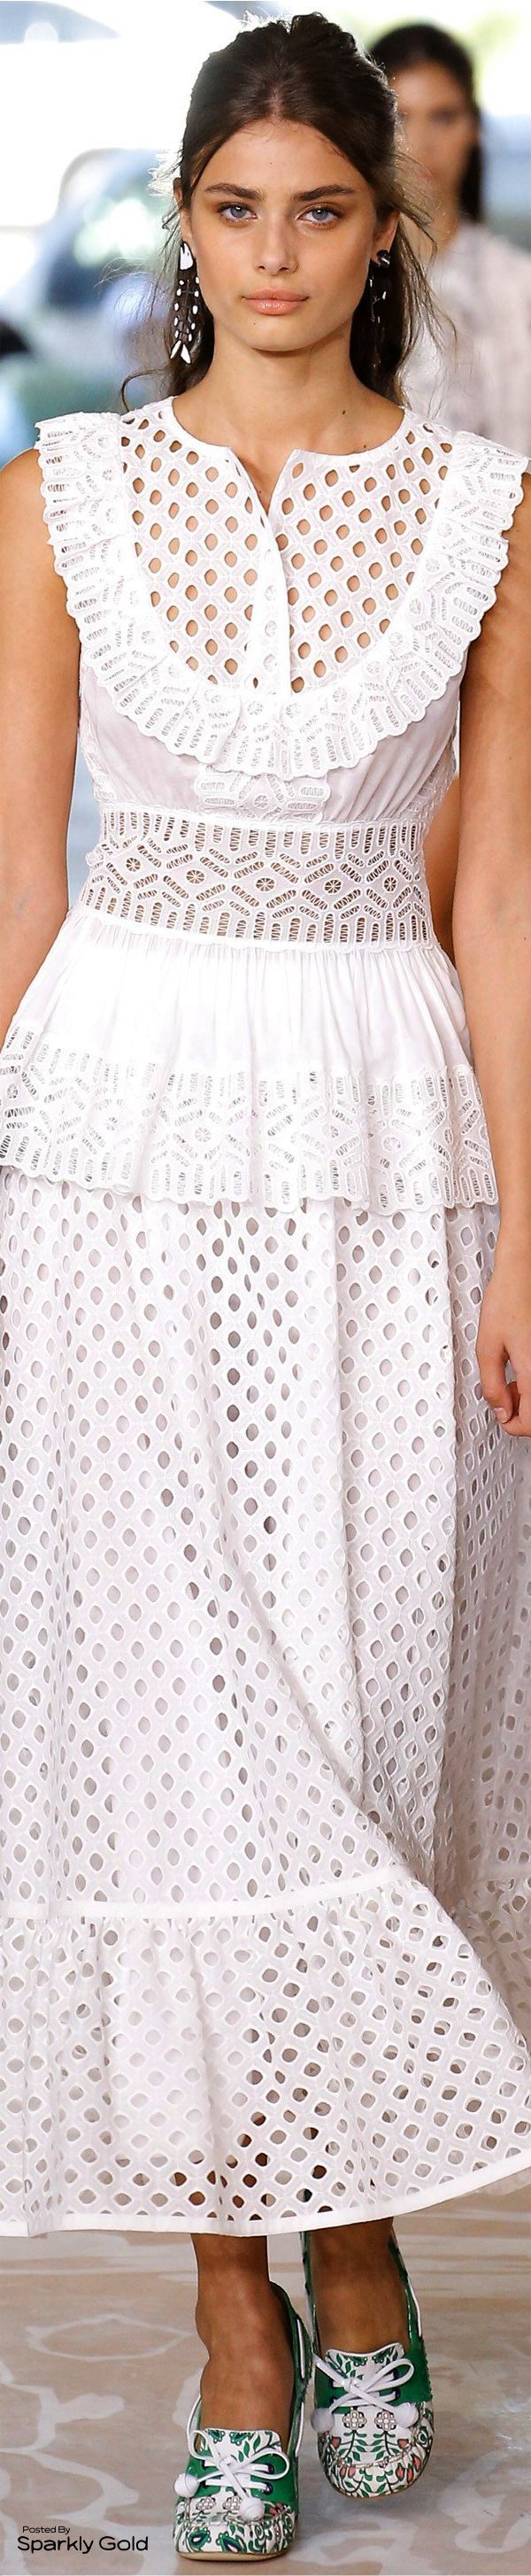 I don't normally like Tory Burch, but the shape of this dress looks like it would be very flattering and cute.